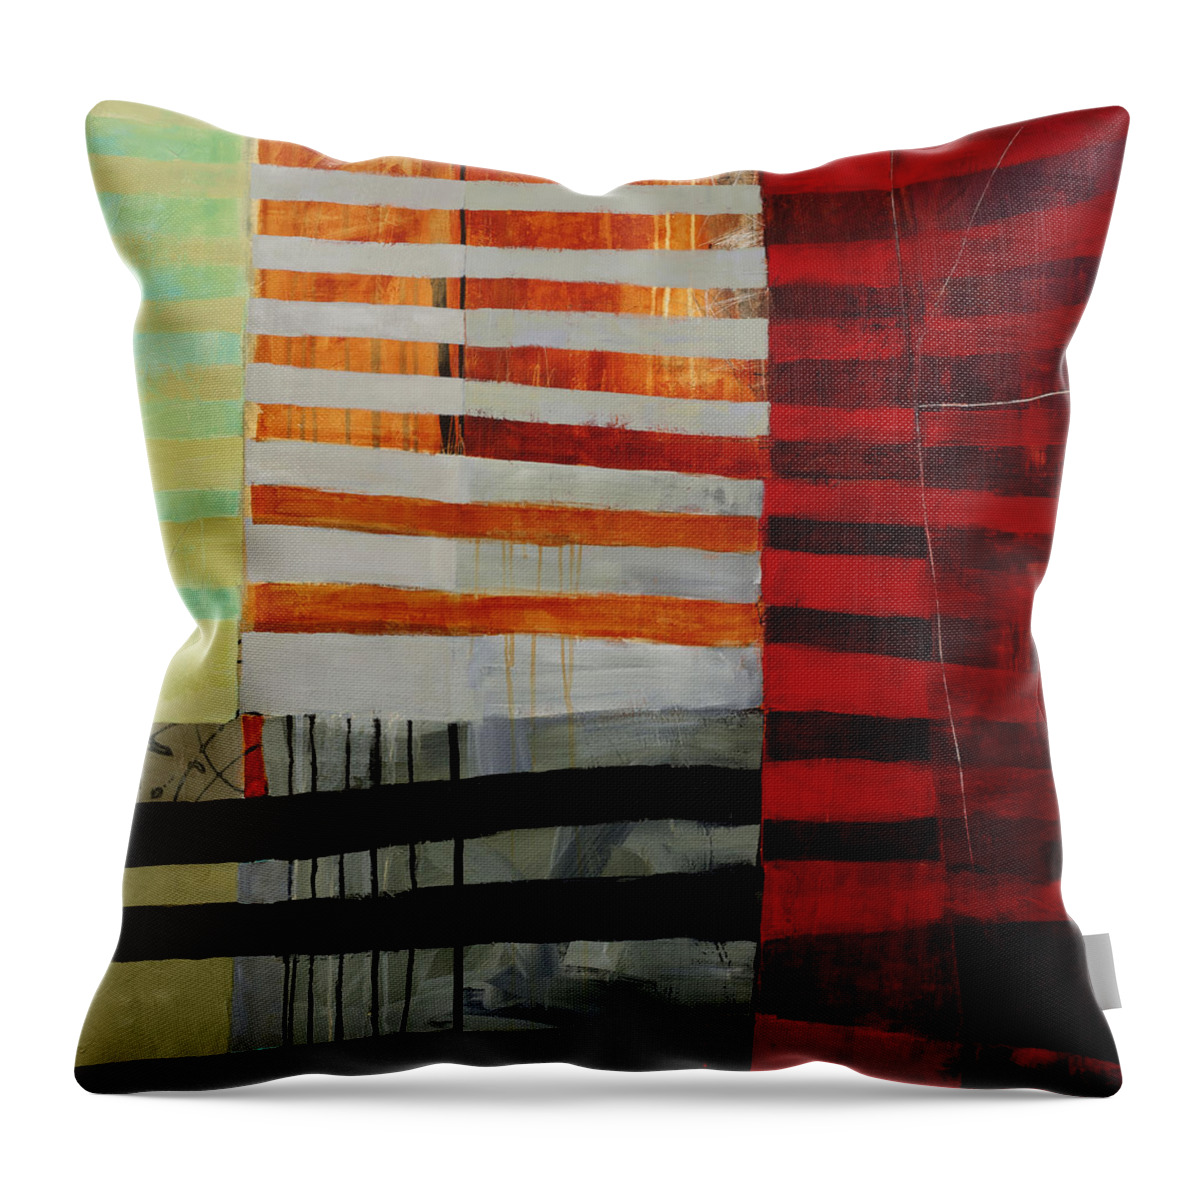 Abstract Art Throw Pillow featuring the painting All Stripes 1 by Jane Davies